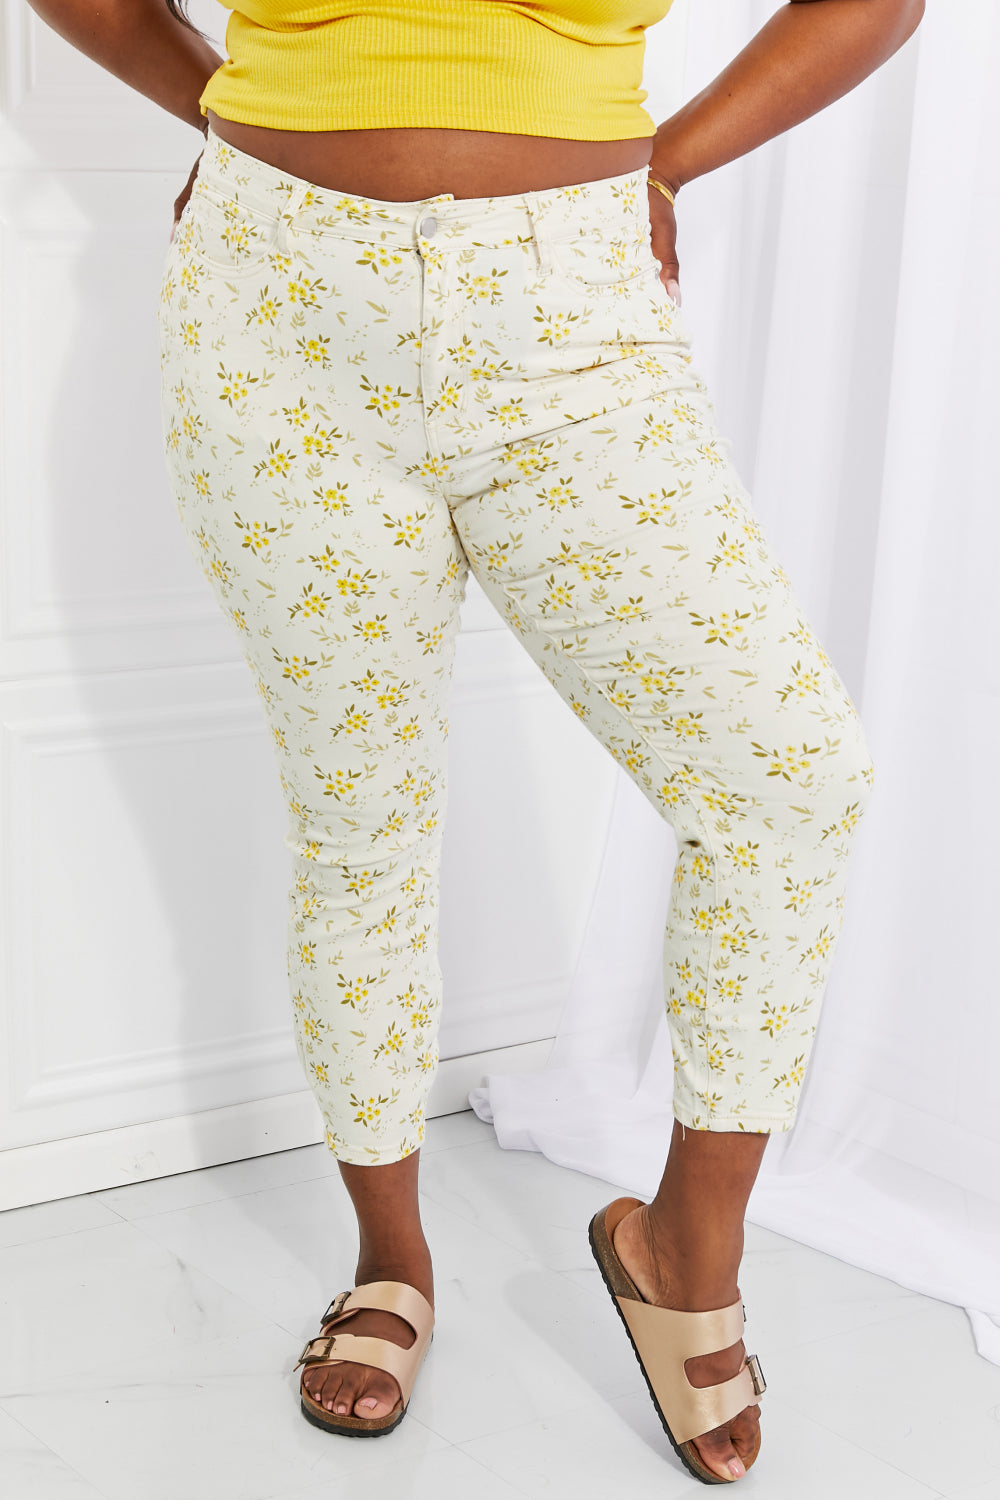 Judy Blue Golden Meadow Floral Skinny Jeans  Southern Soul Collectives 